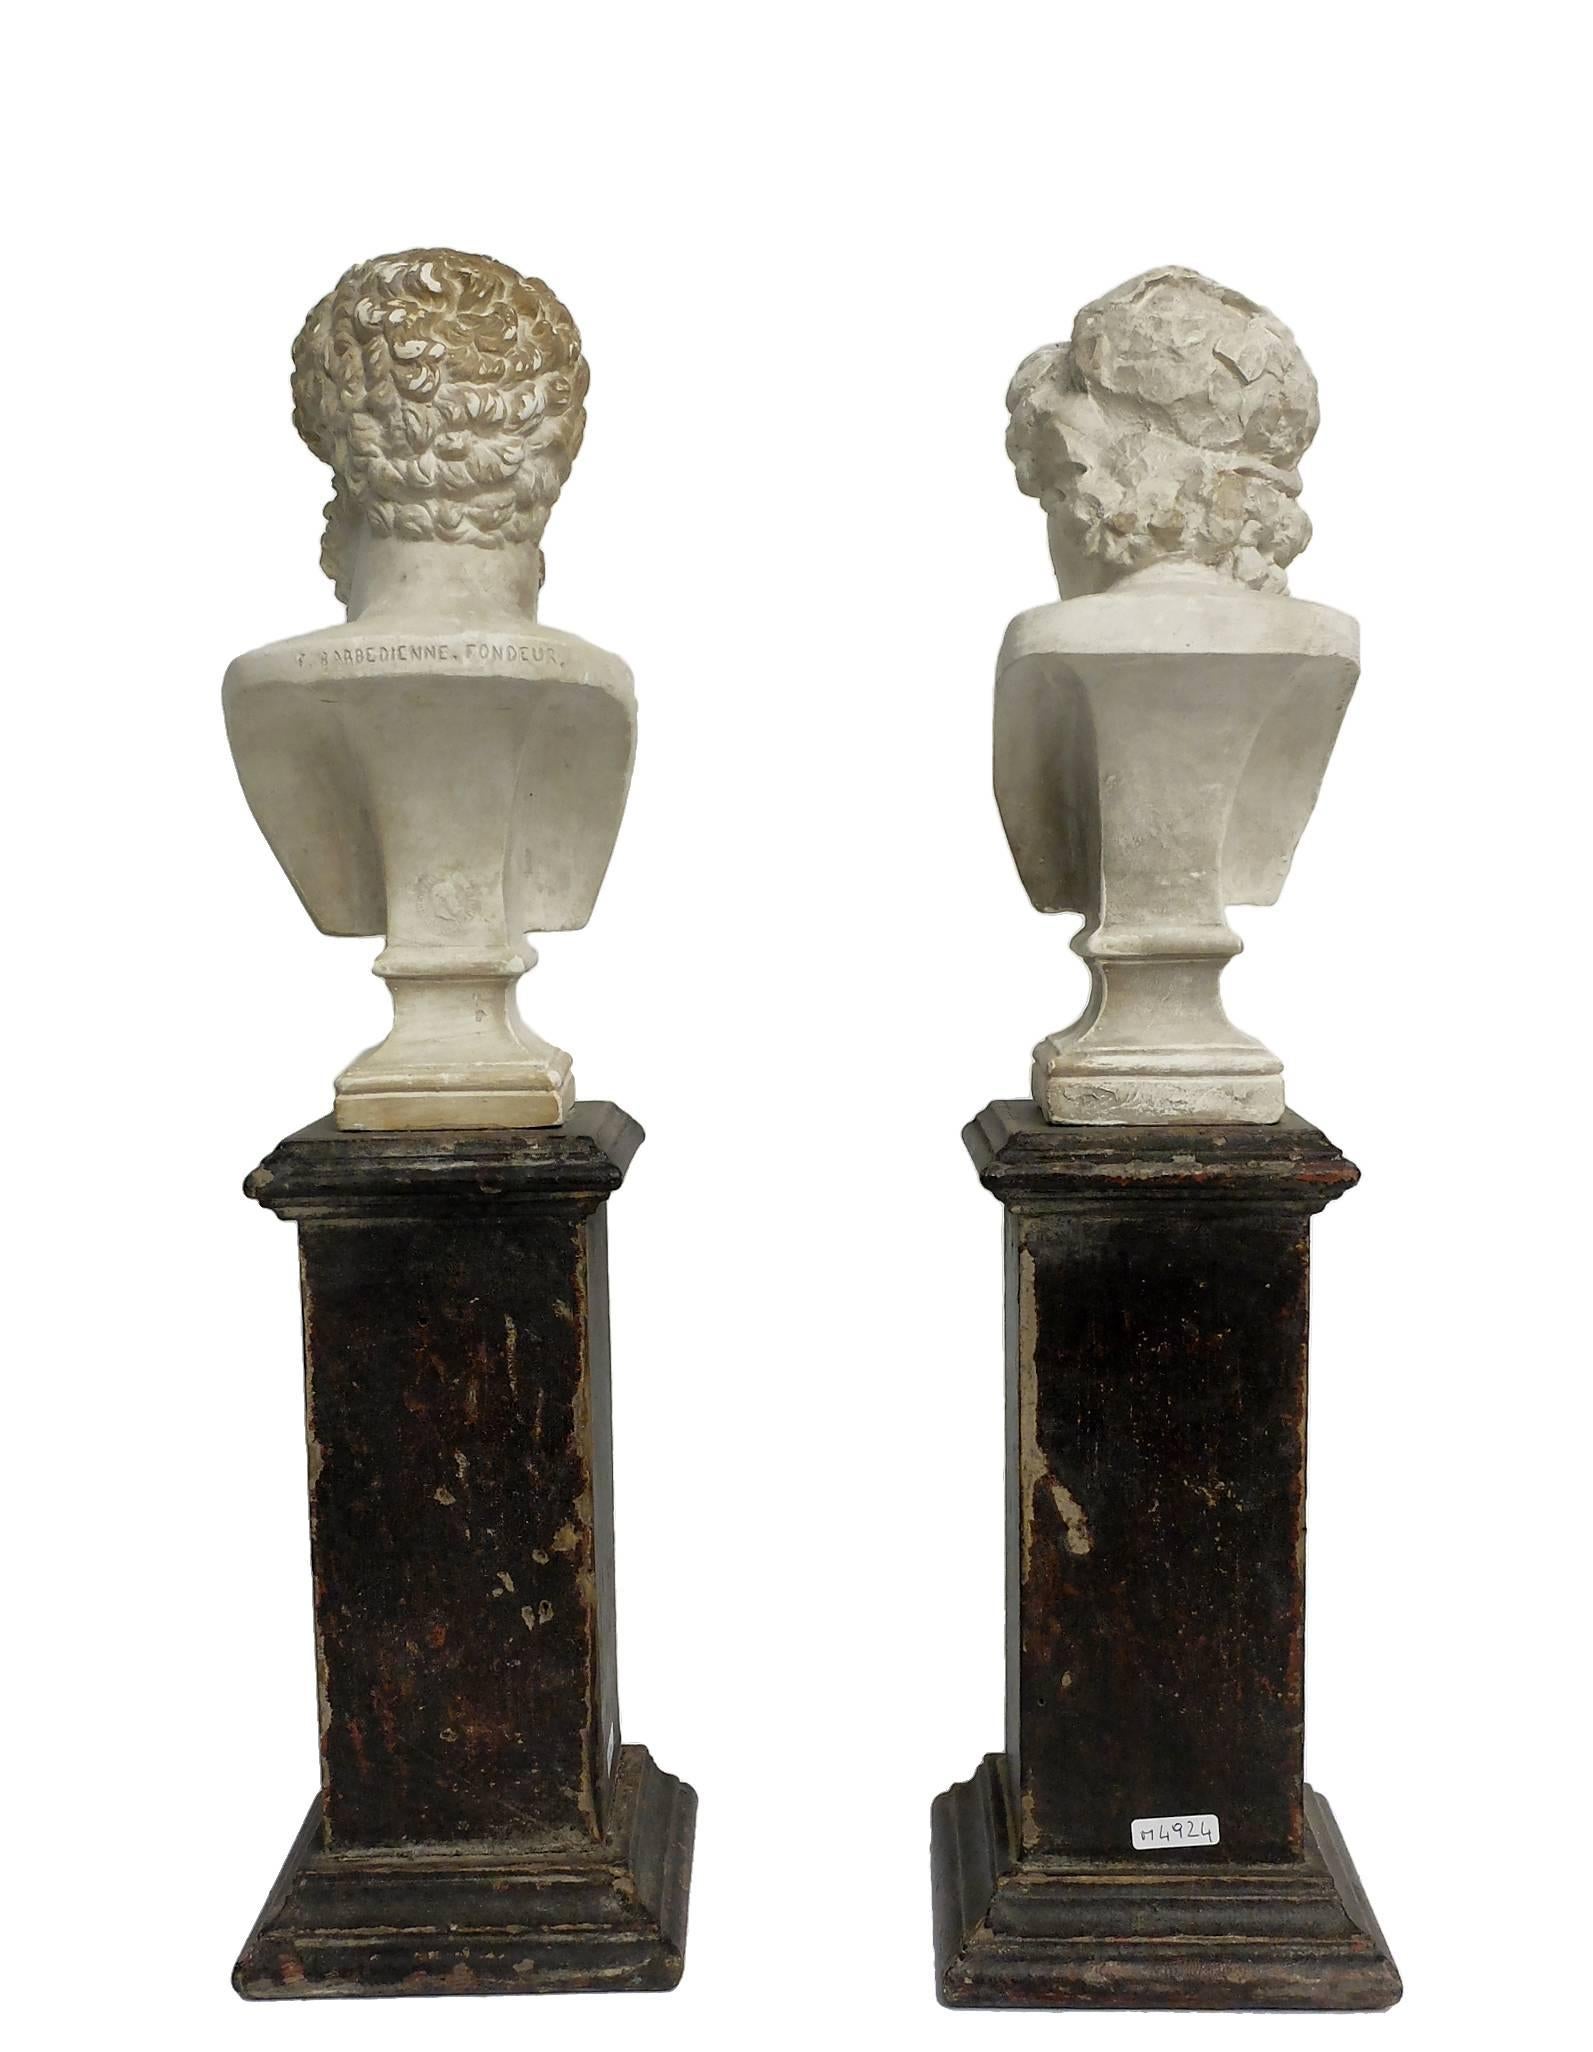 Italian Pair of Academic Cast of Plaster Busts Depicting Lucius Verus and Alexander